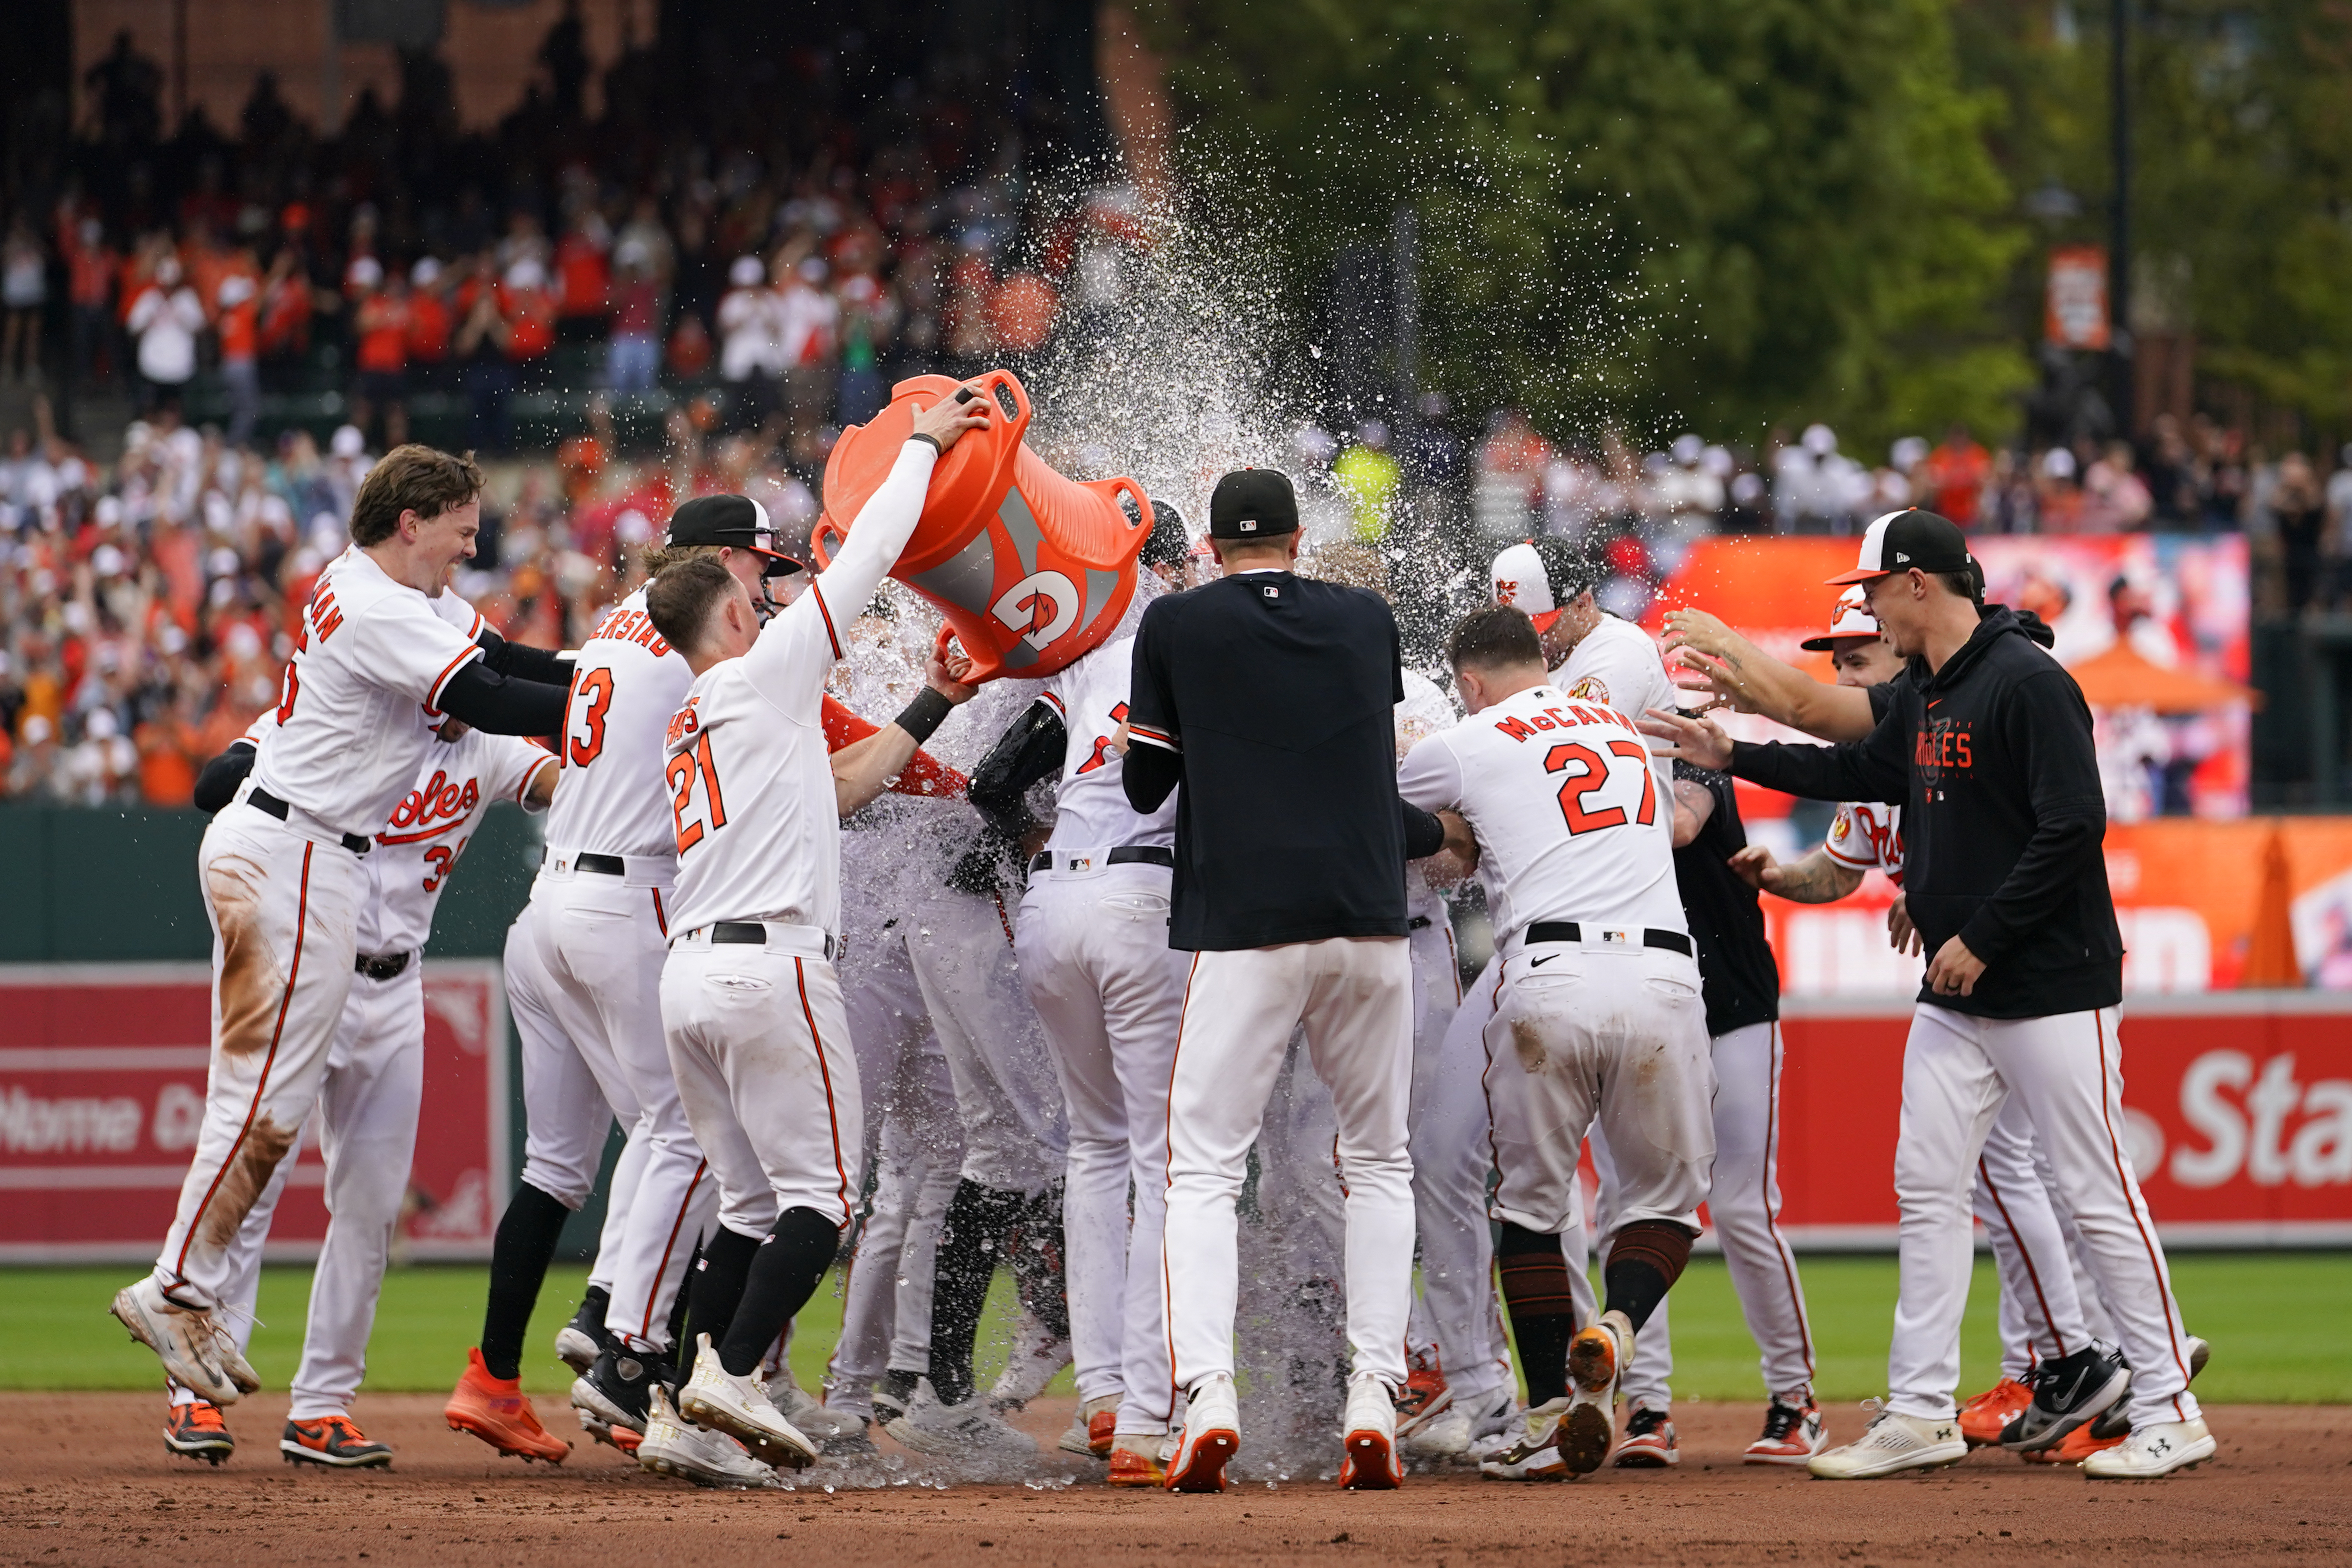 Baltimore Orioles: Top 5 Base Stealers in Franchise History - Page 5